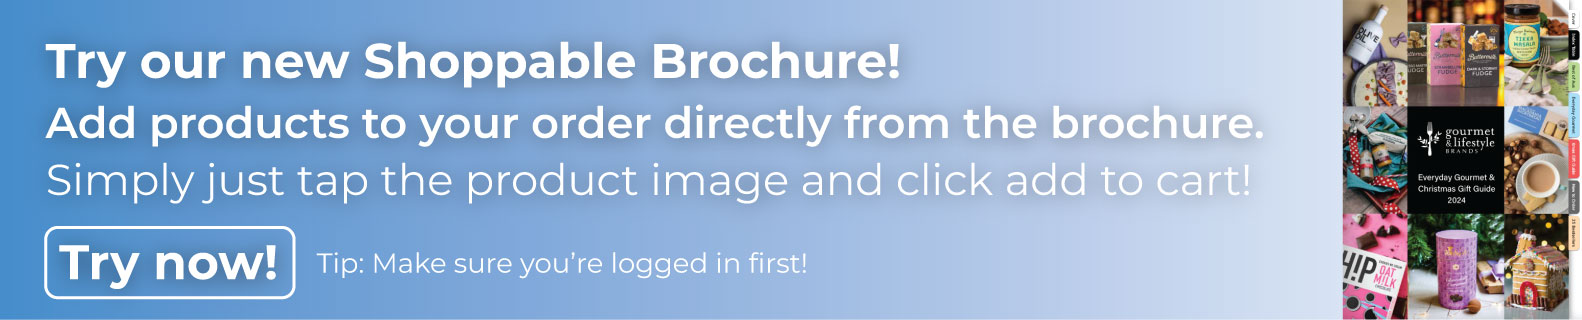 Try our new Shoppable Brochure! Click here